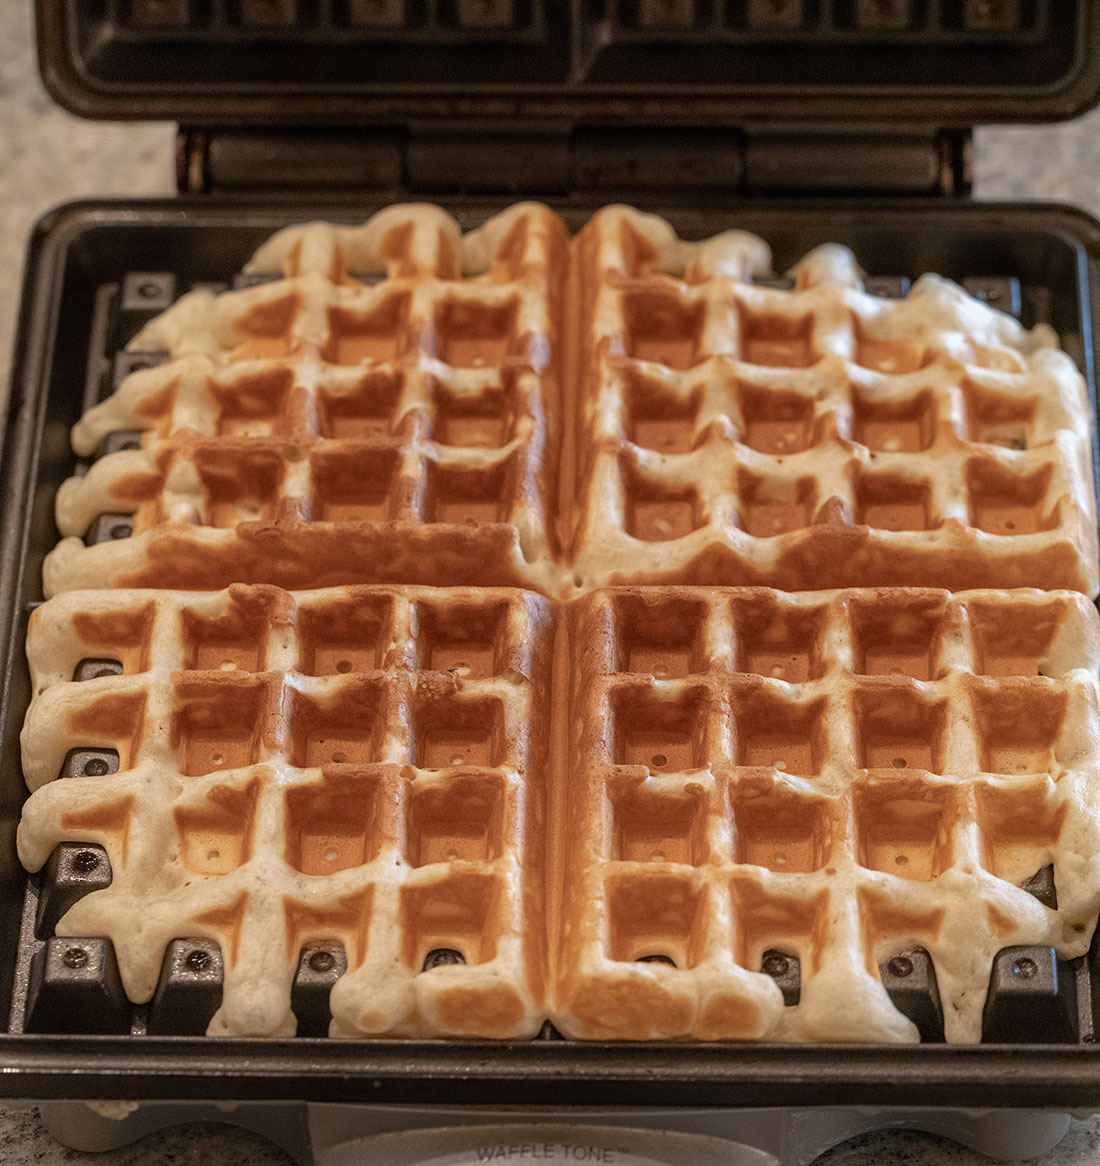 Waffles cooked golden brown in an open waffle maker.